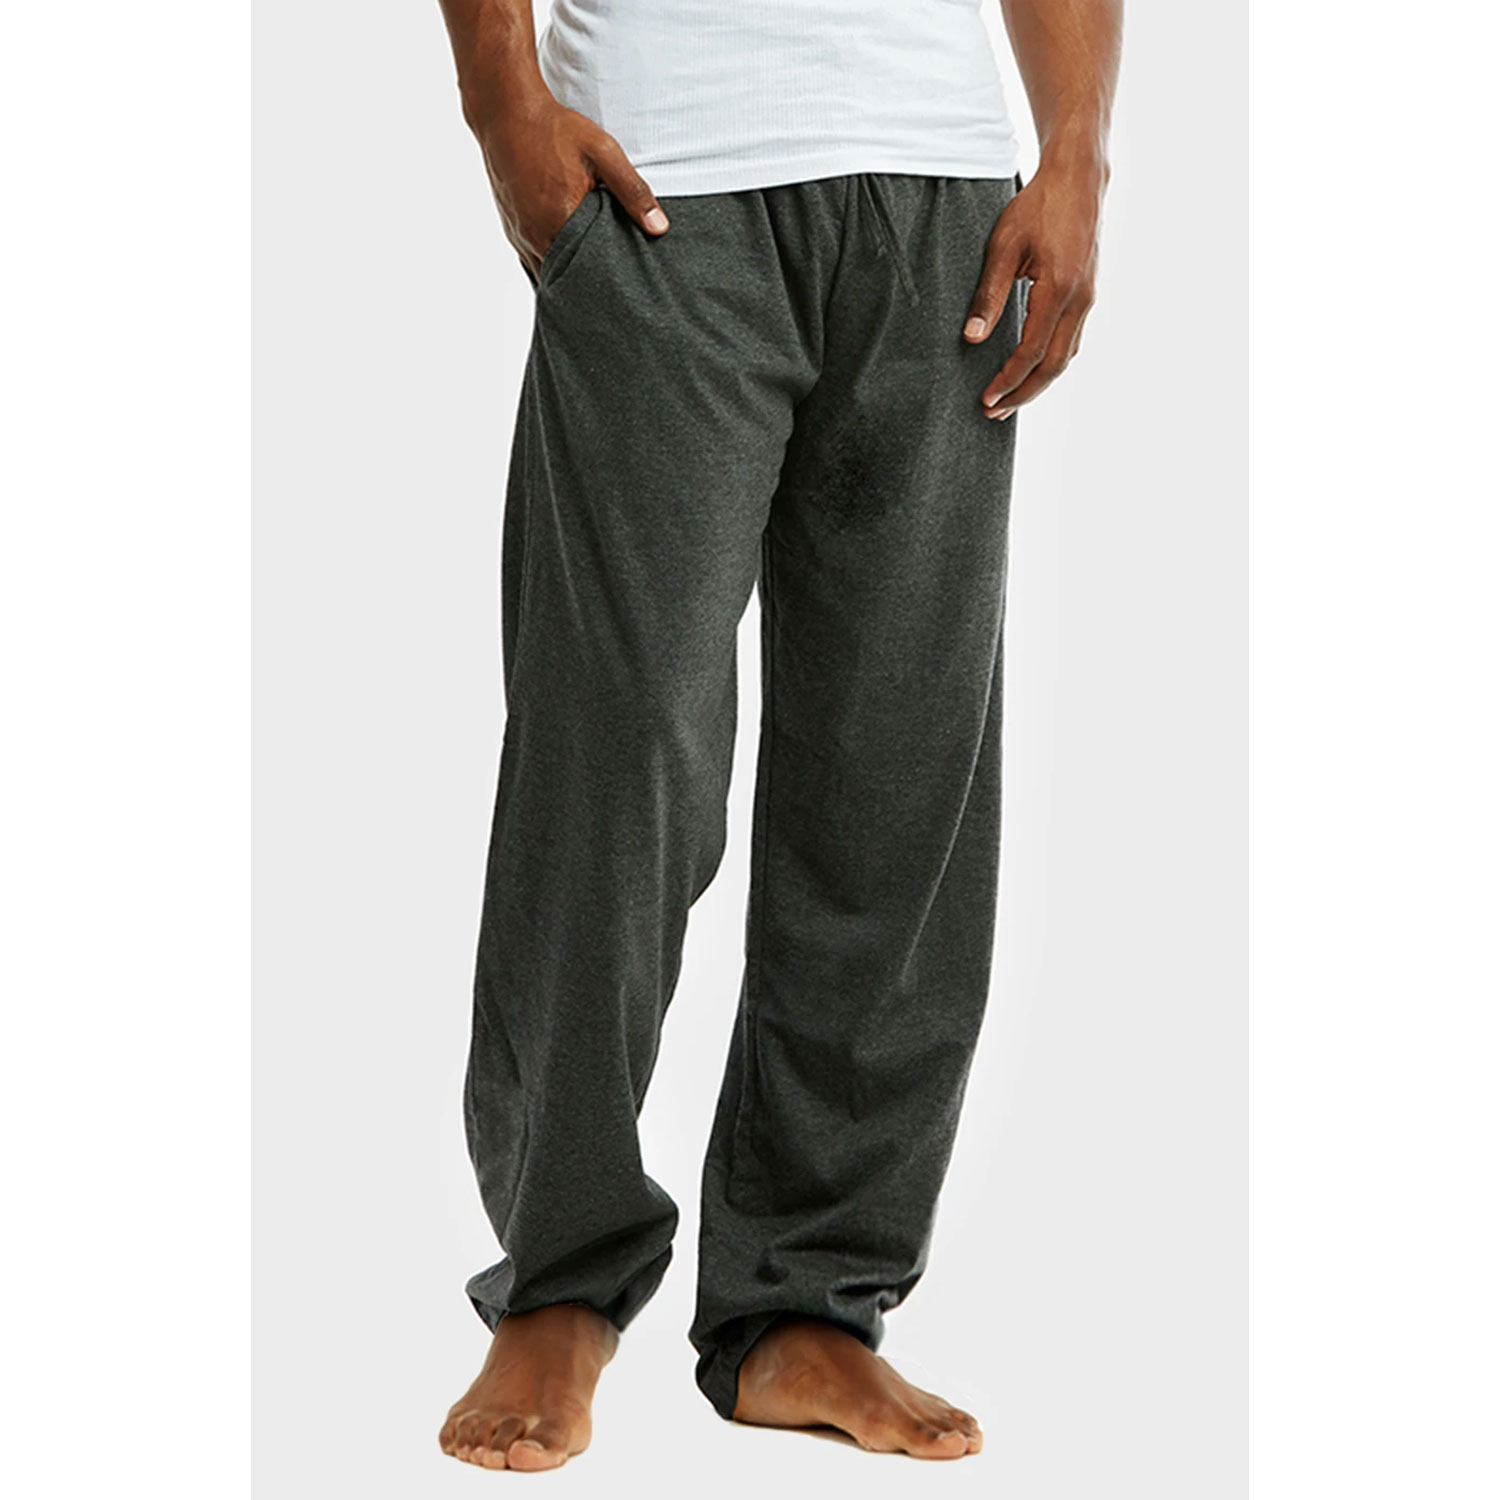 Cottonbell Men's Knitted Pajama Pants